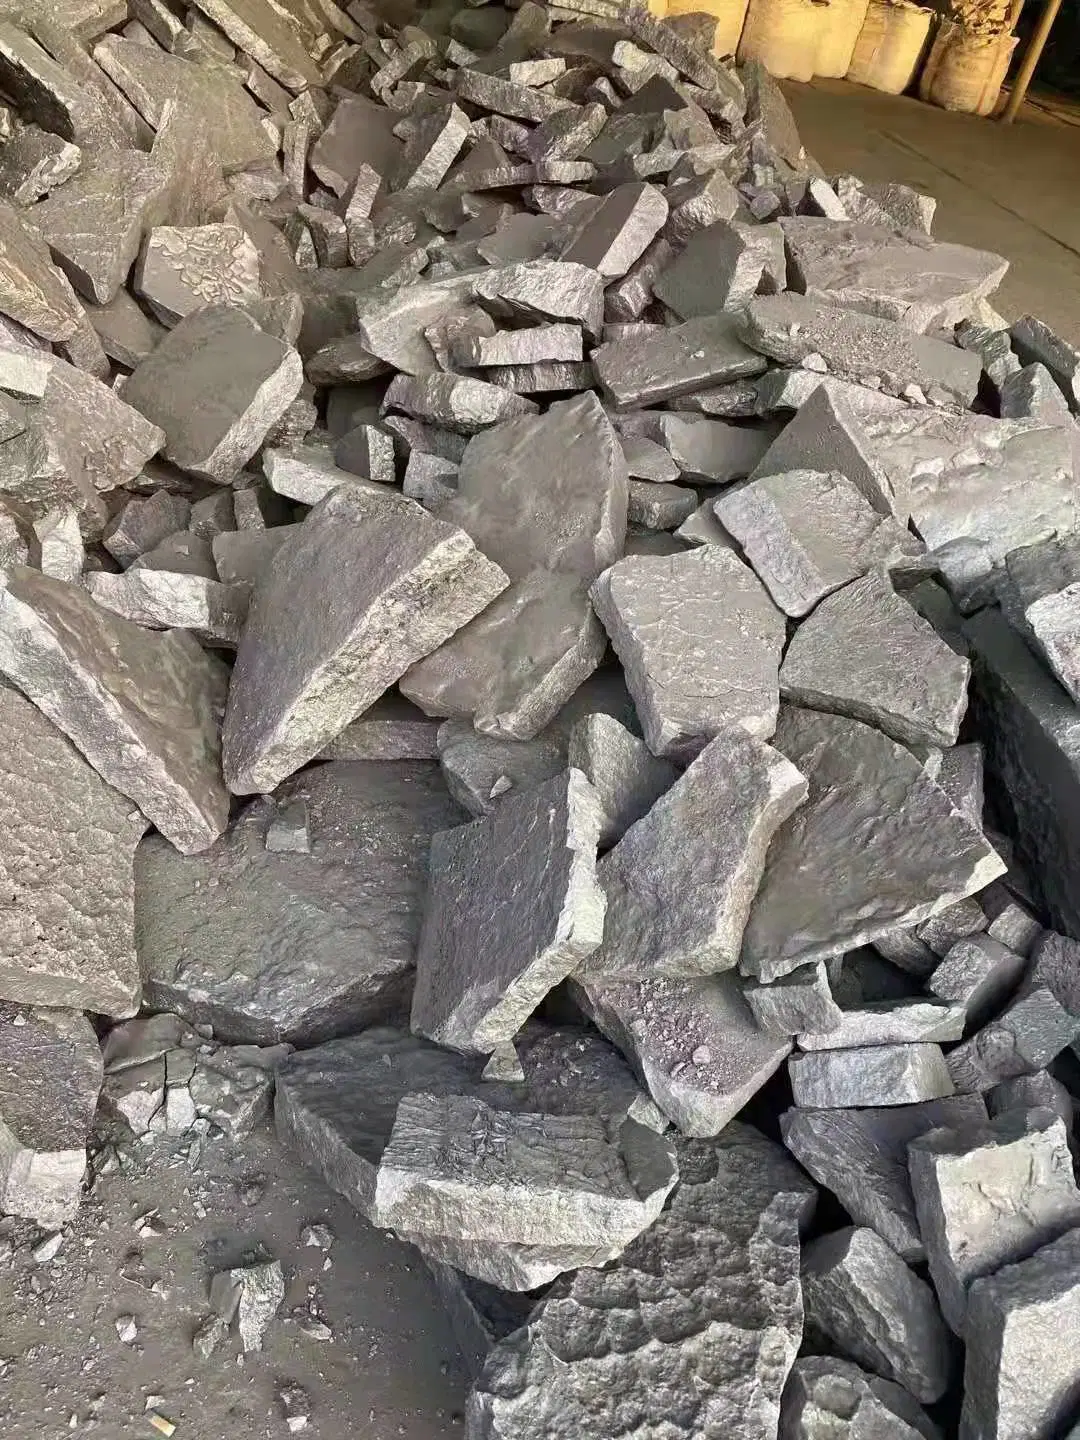 OEM Carbon Ferro Silicon Alloy for Casting and Steelmaking Additive